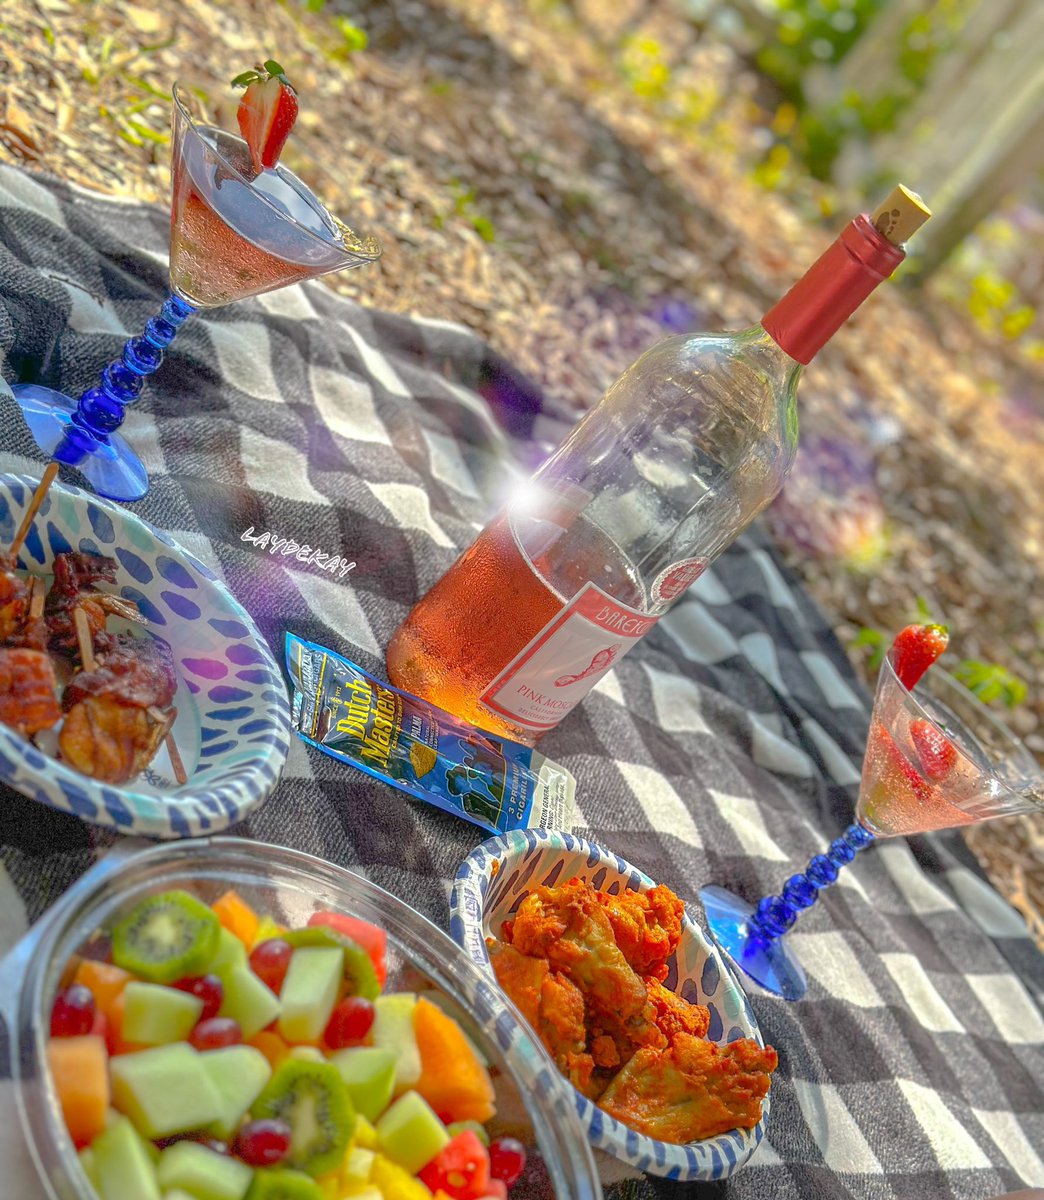 I actually did this 🅿️icnic Setupppp🥰 •WrappedBaconShrimp •HotWings •FruitTray •Wine 🧘🏽‍♀️☮️🕊️ #LittleThings